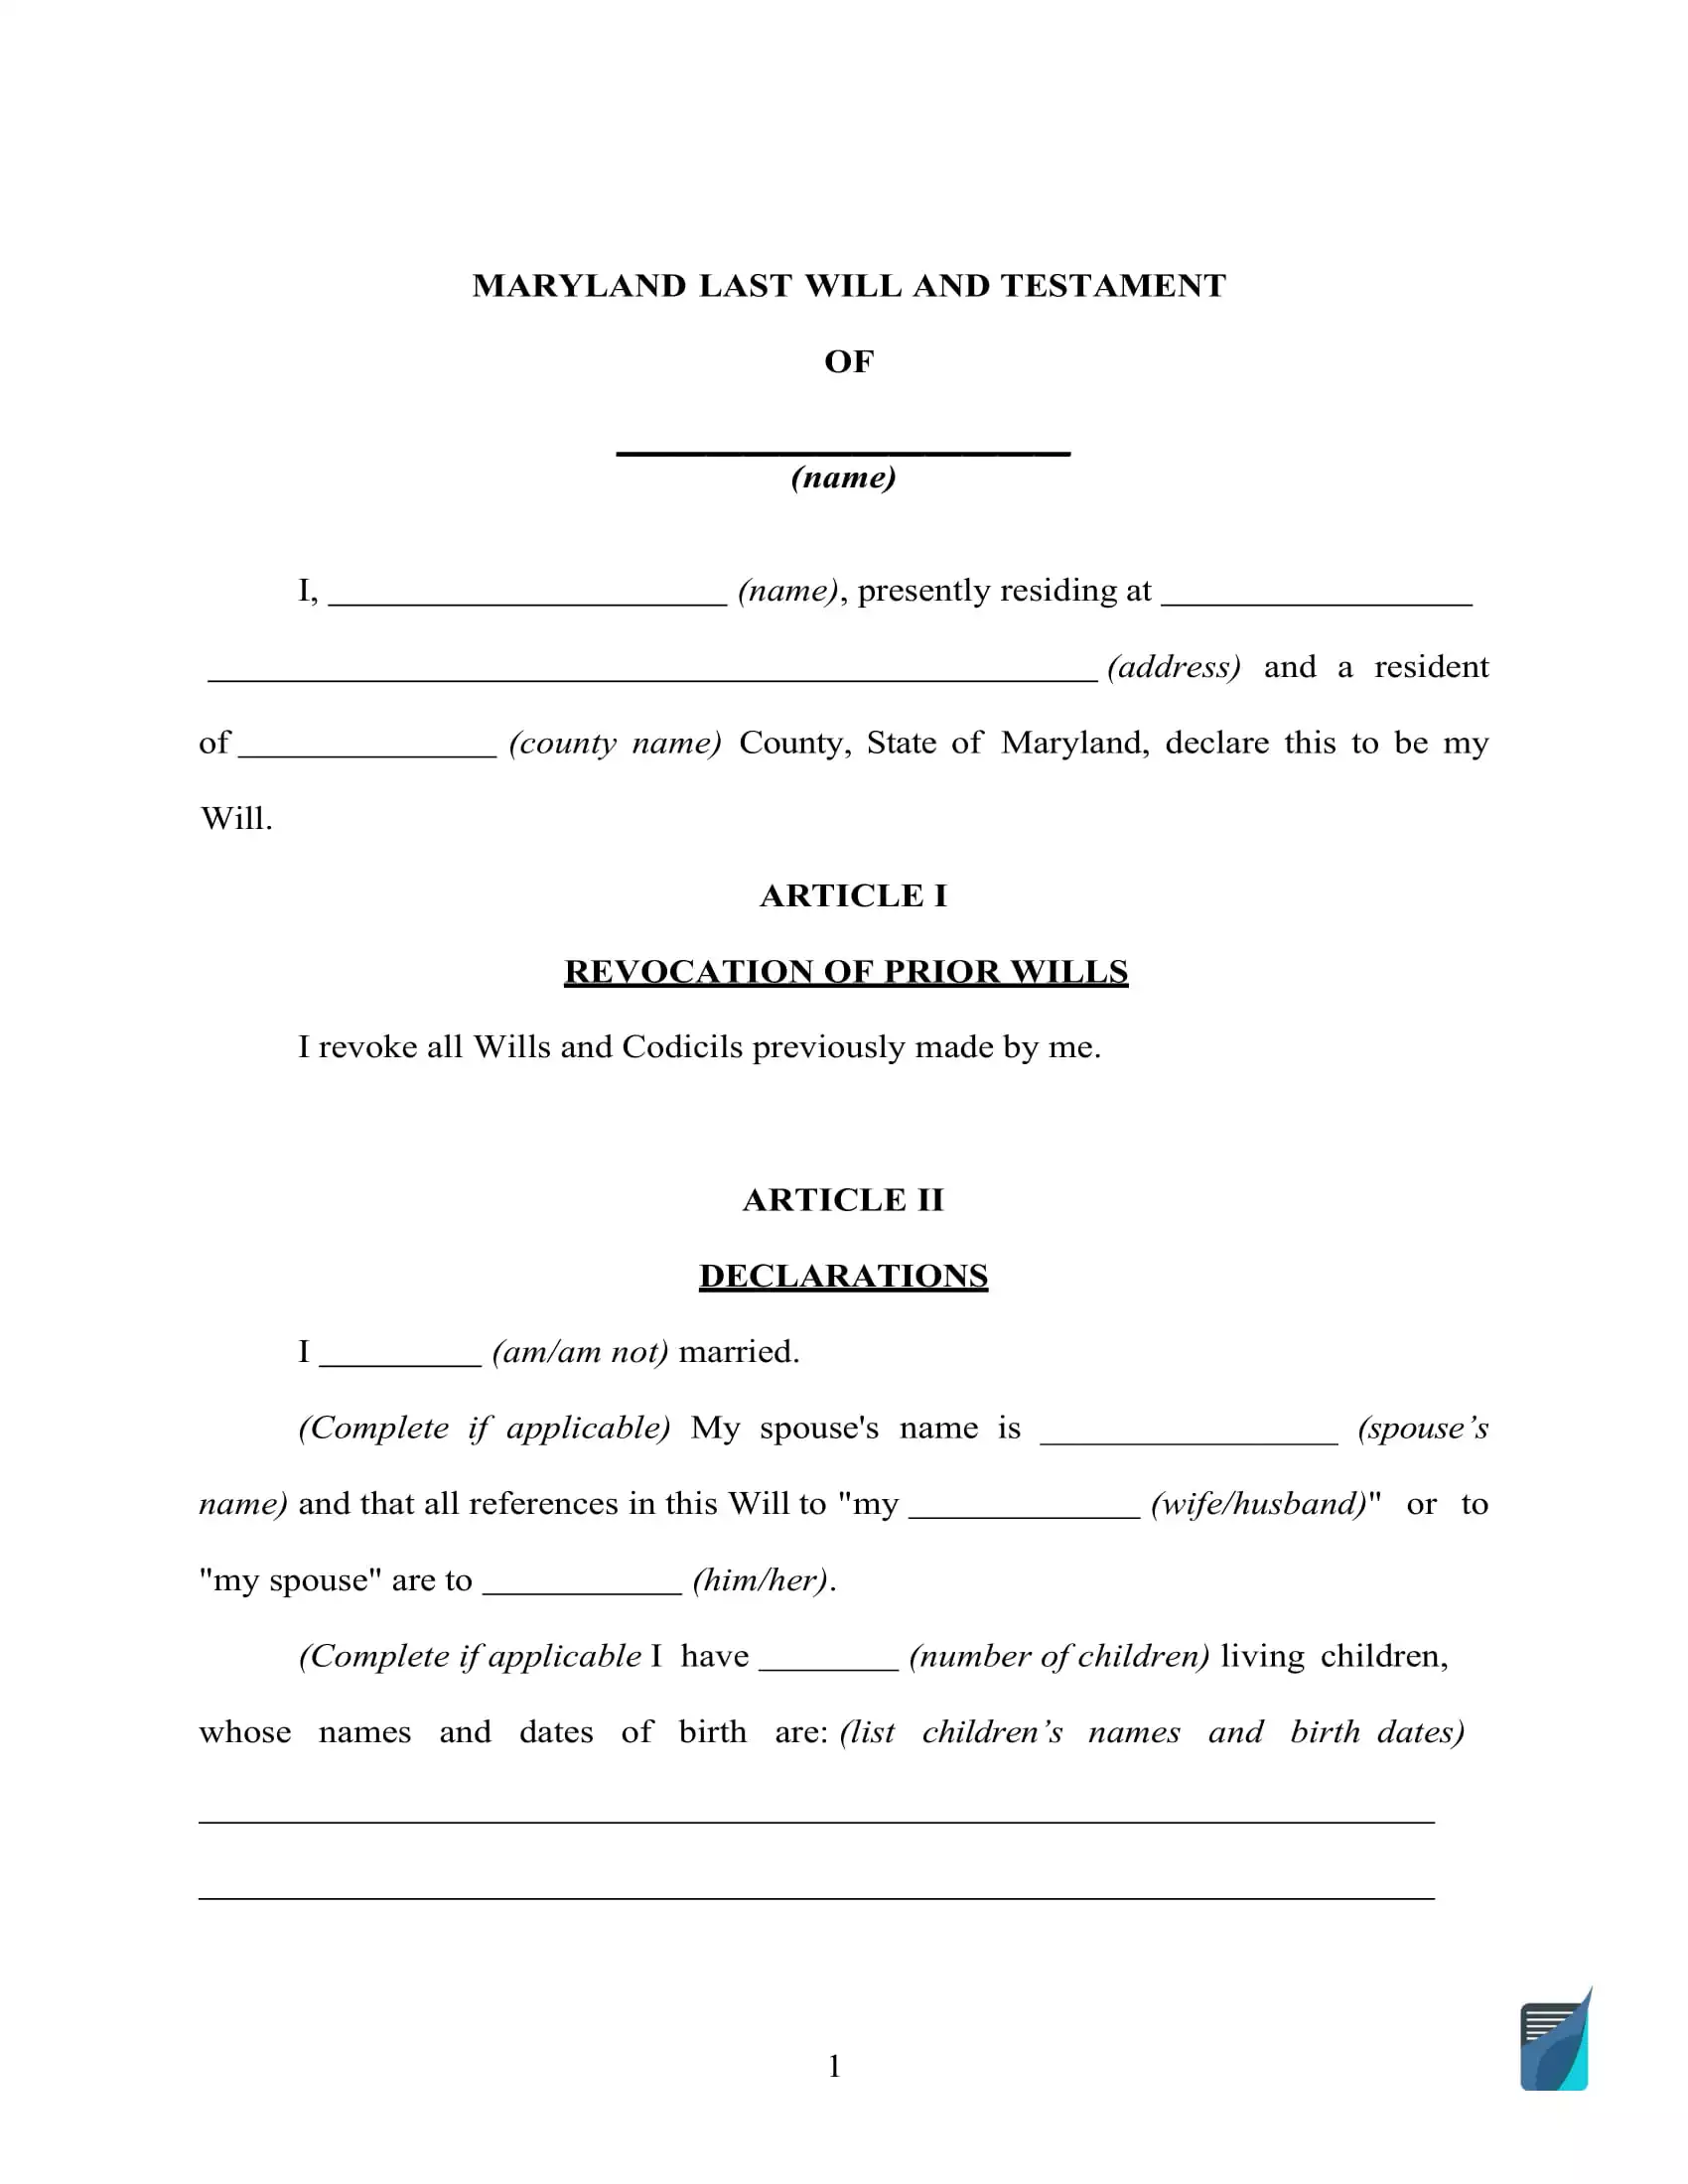 maryland-last-will-and-testament-template